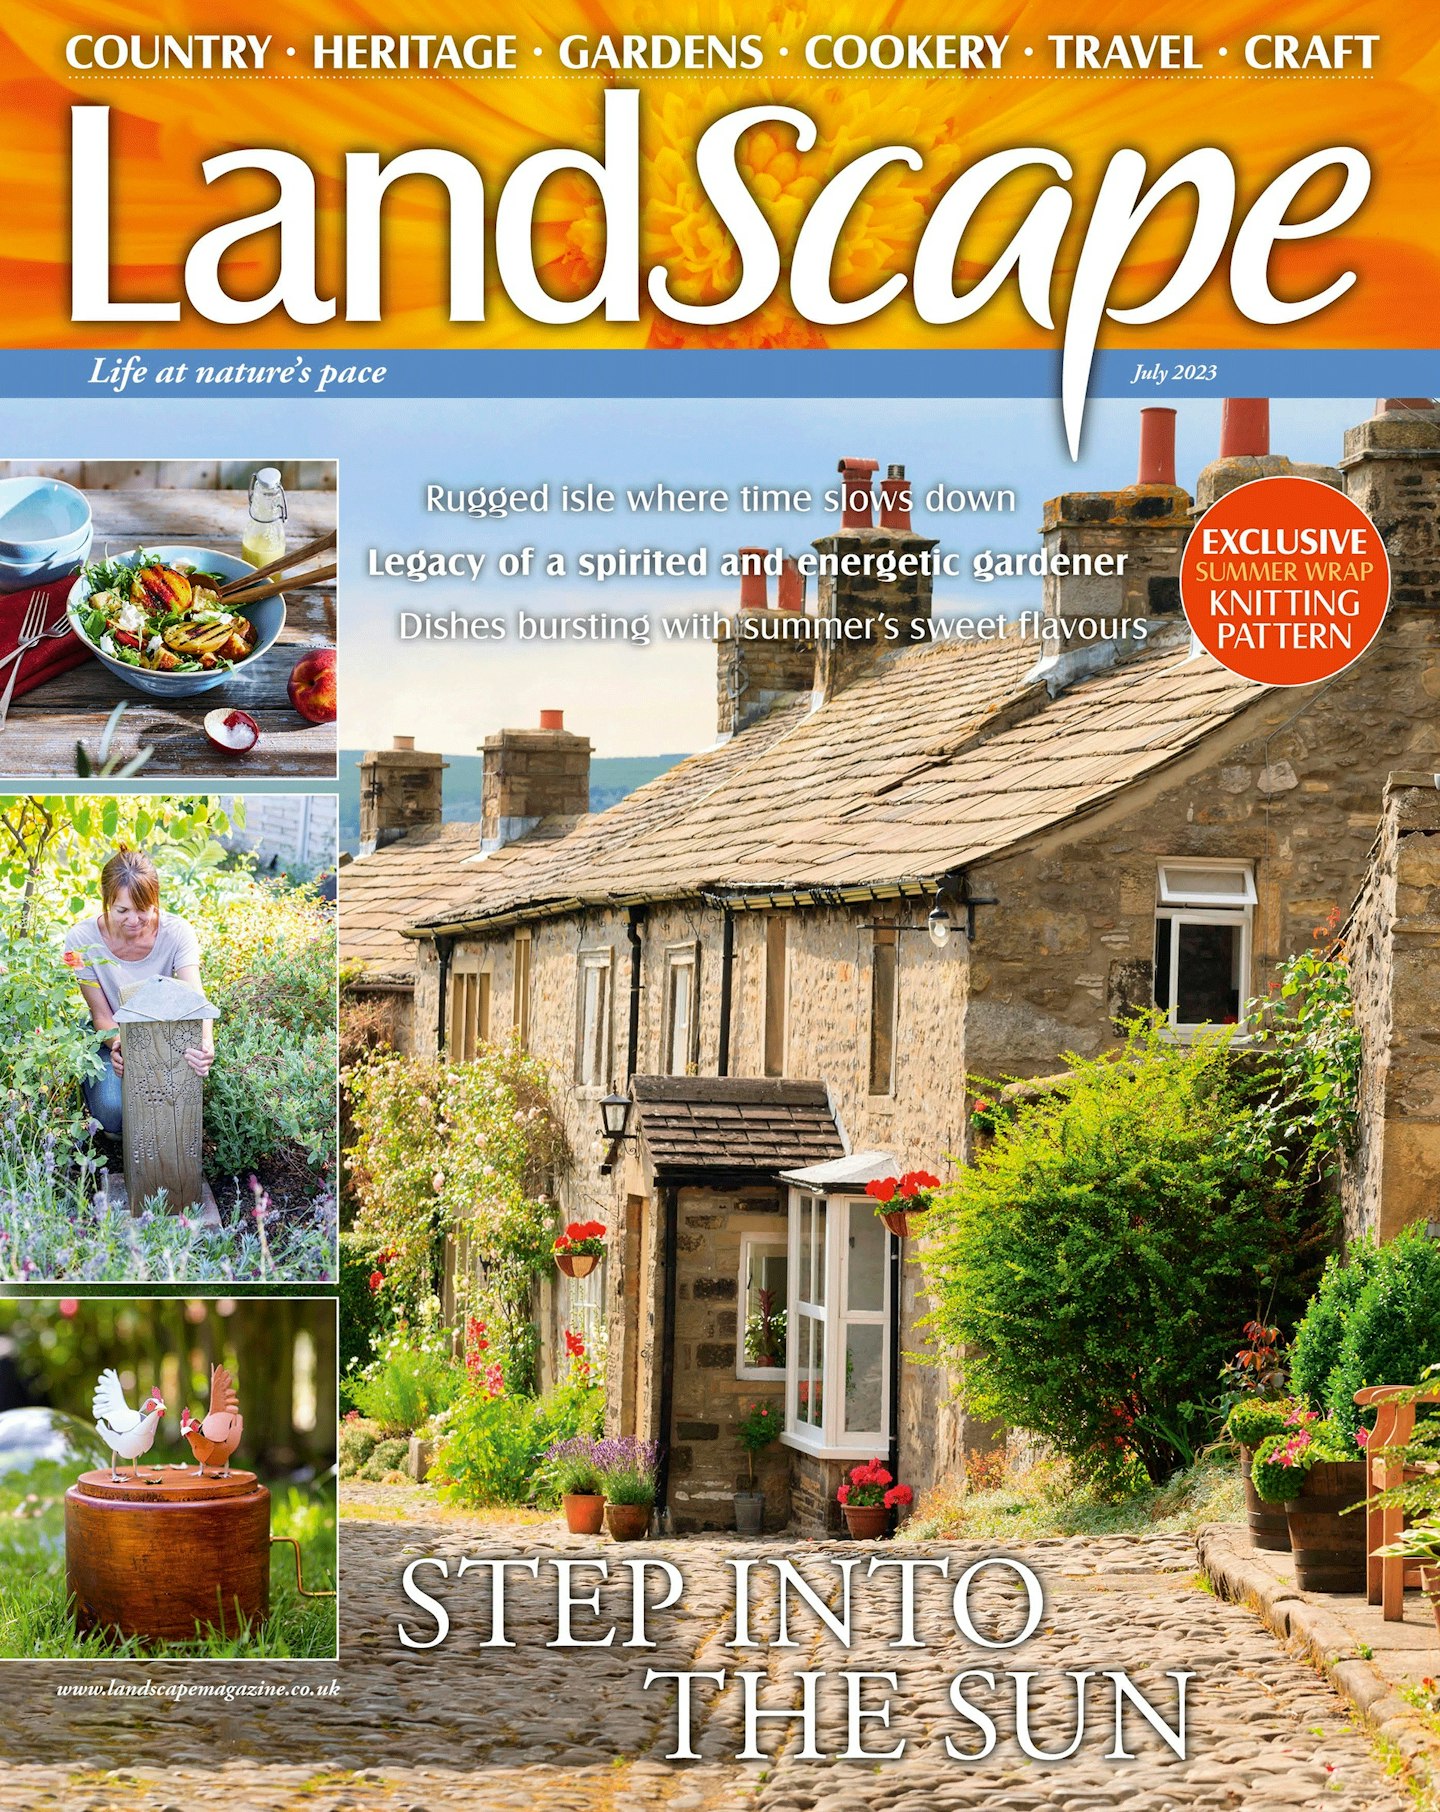 LandScape in the July issue